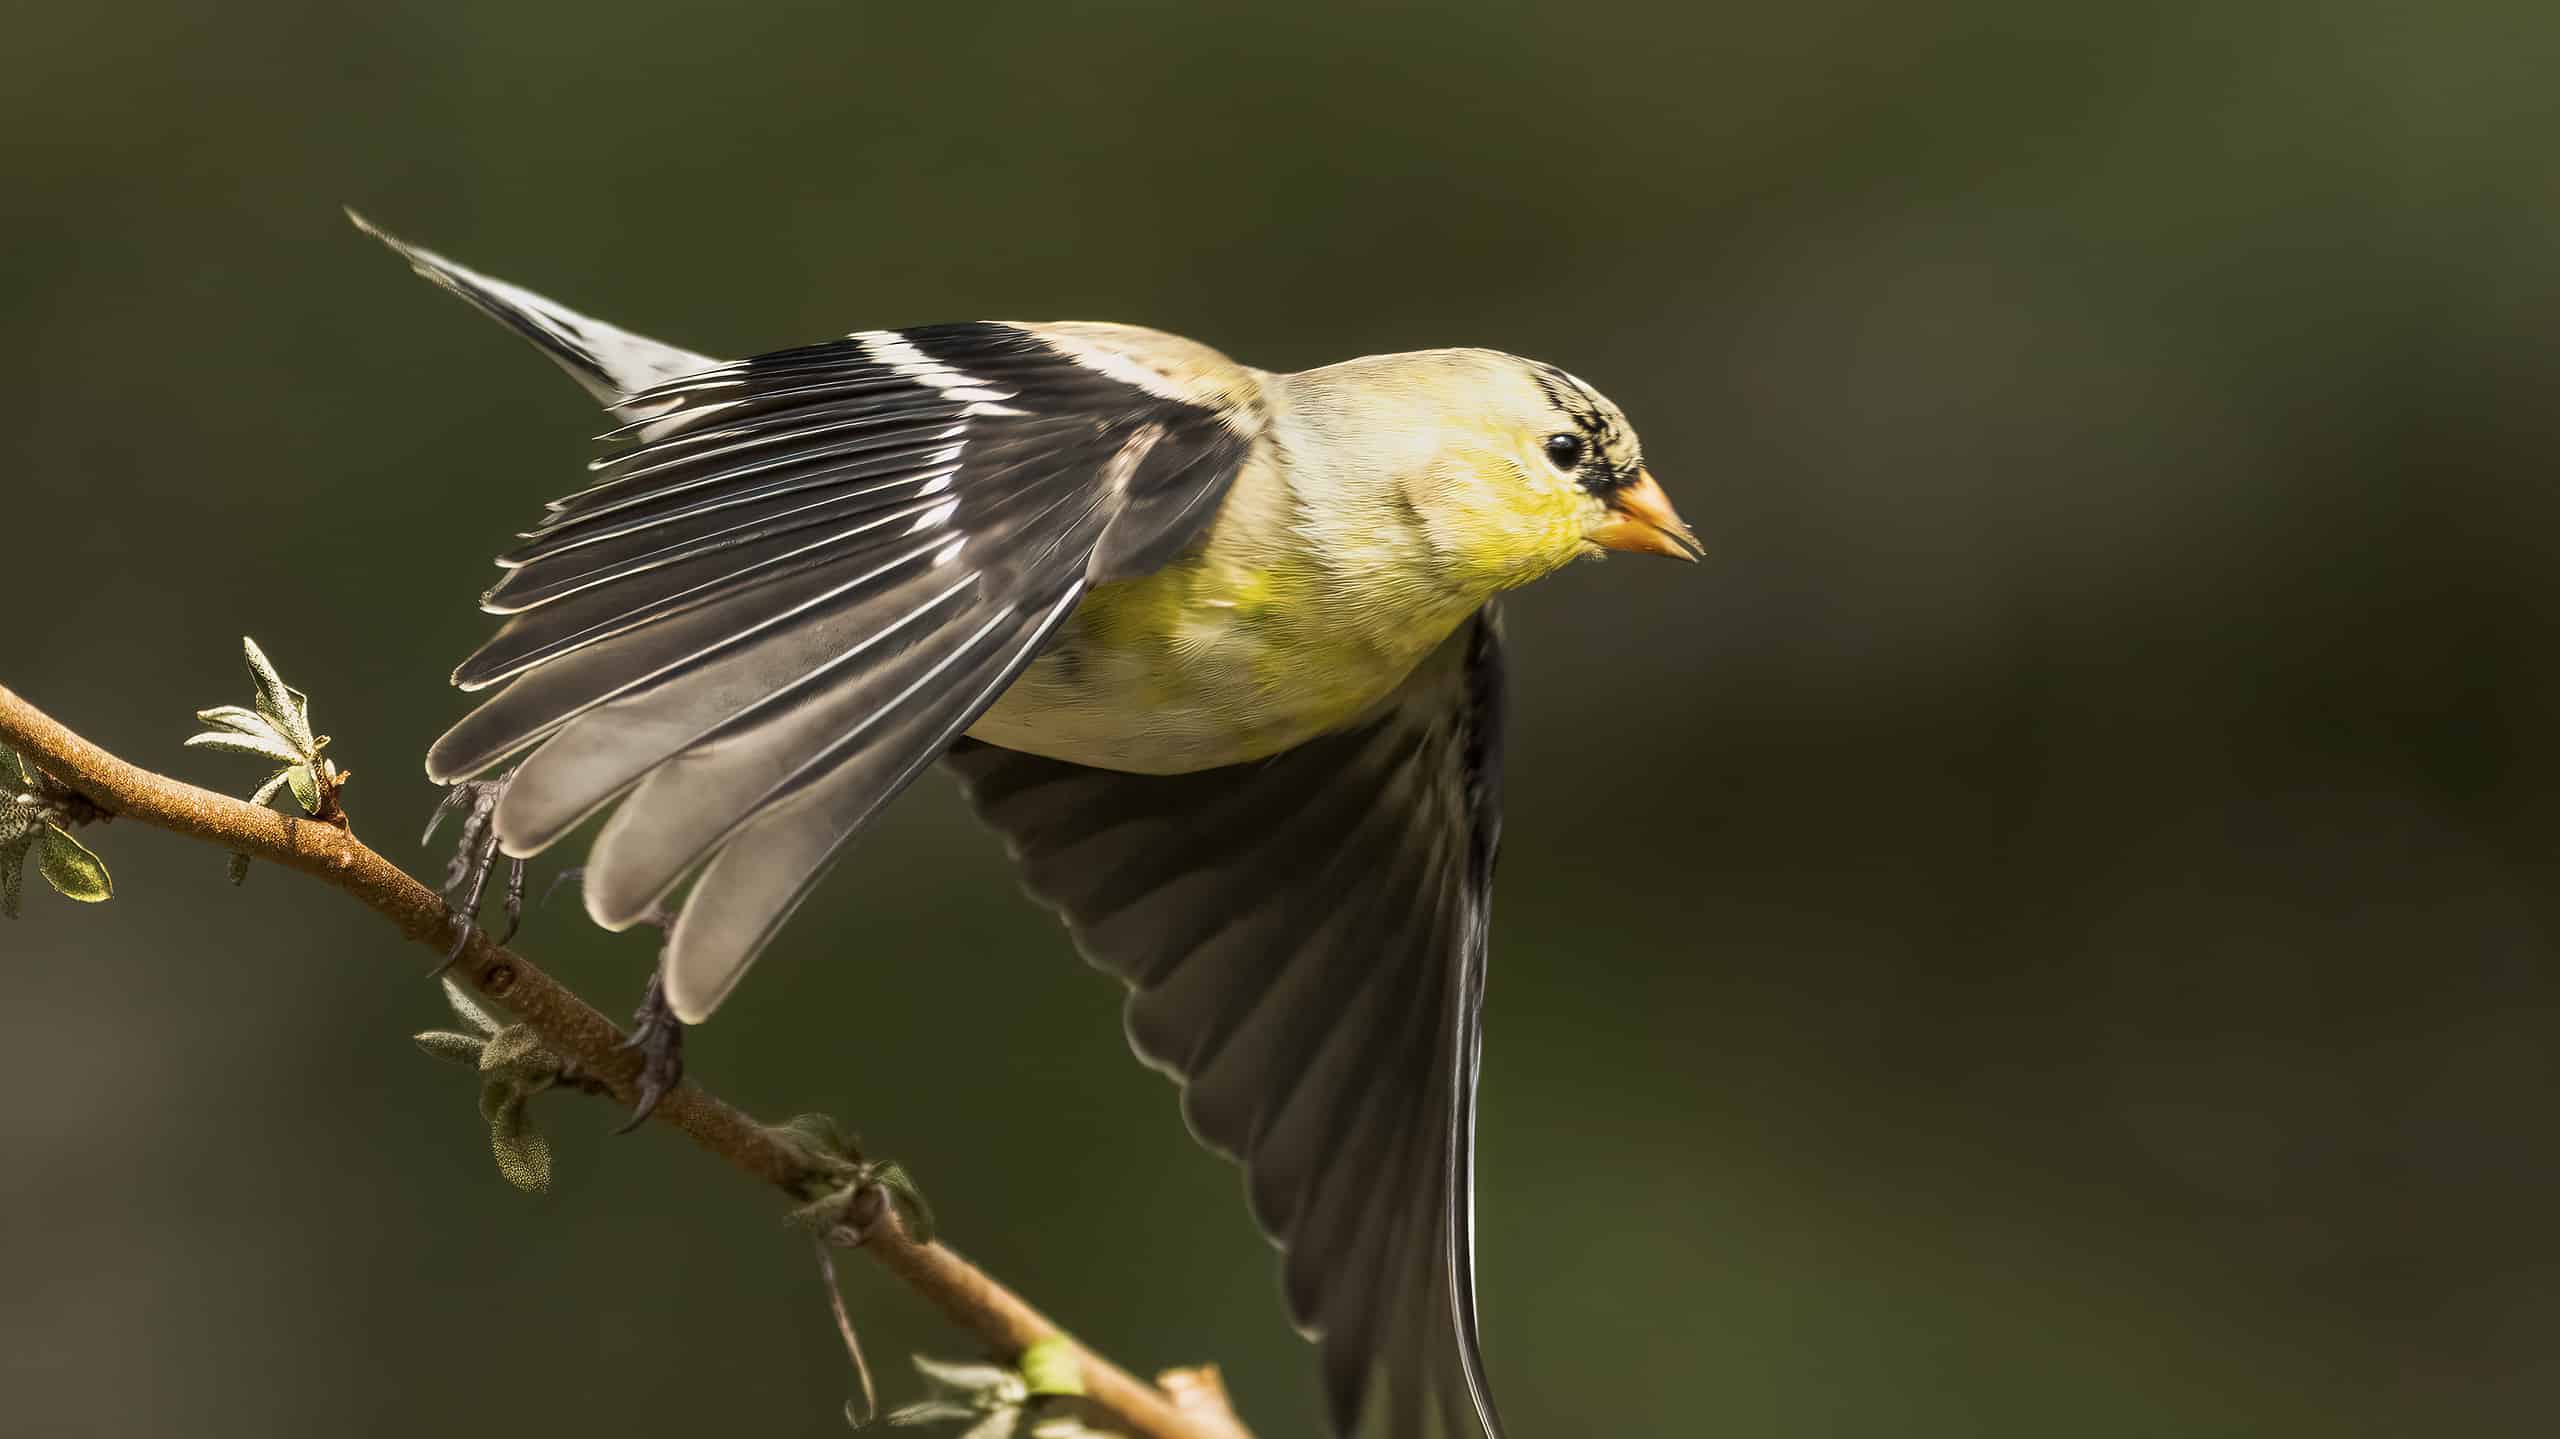 American goldfinch in flight. This bird is the official state animal of Iowa.